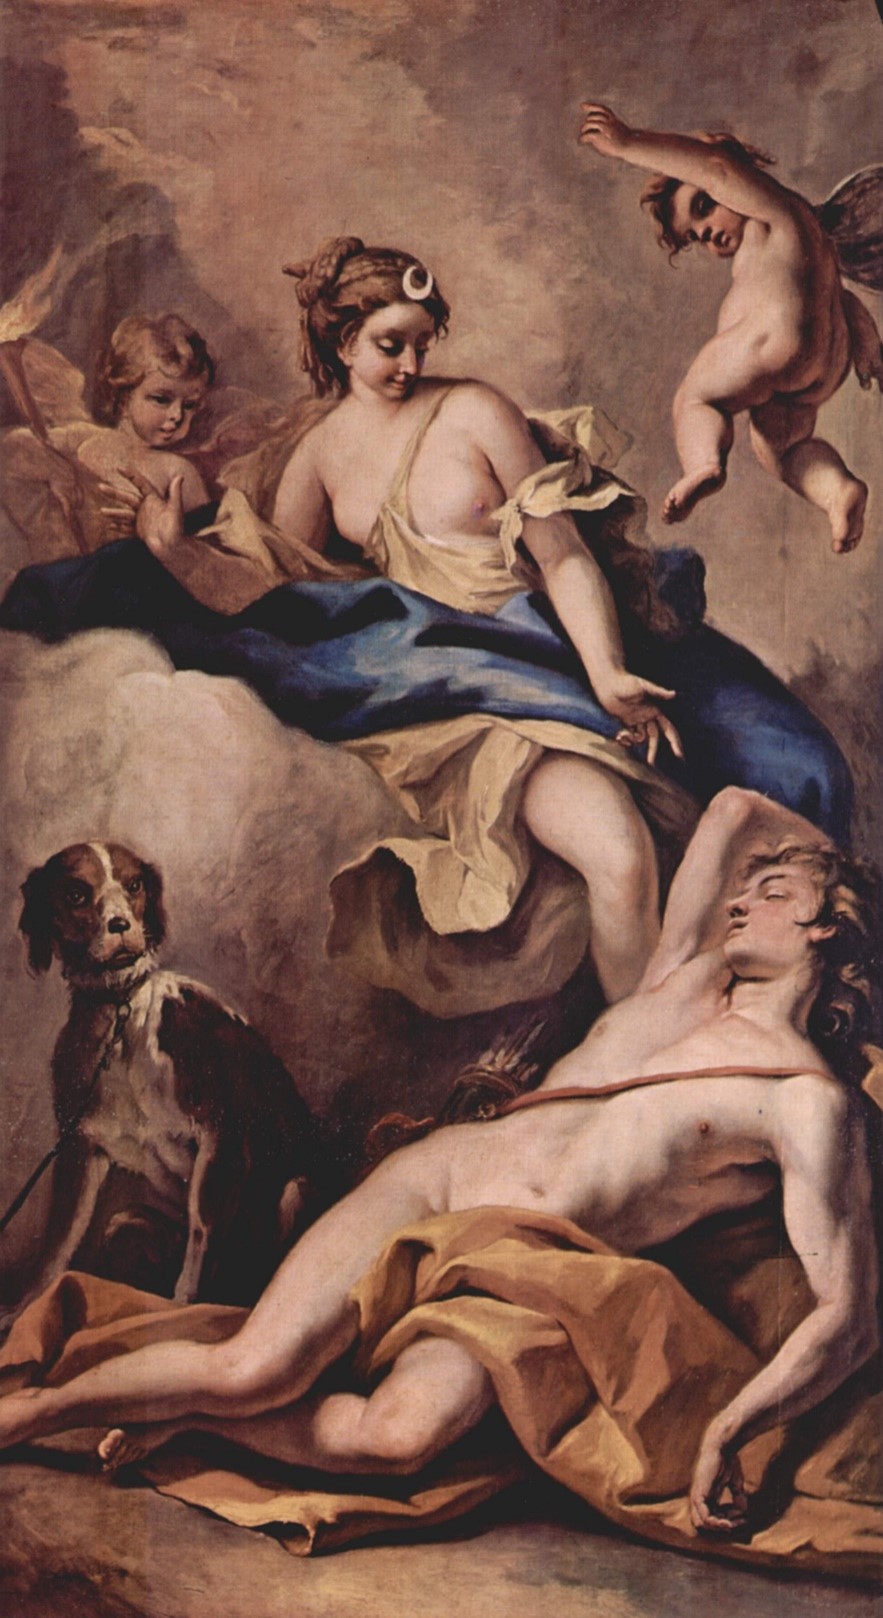 A painting of Diane (Luna), Endymion and cherubs. Endymion is laying down next to a dog sitting upright.